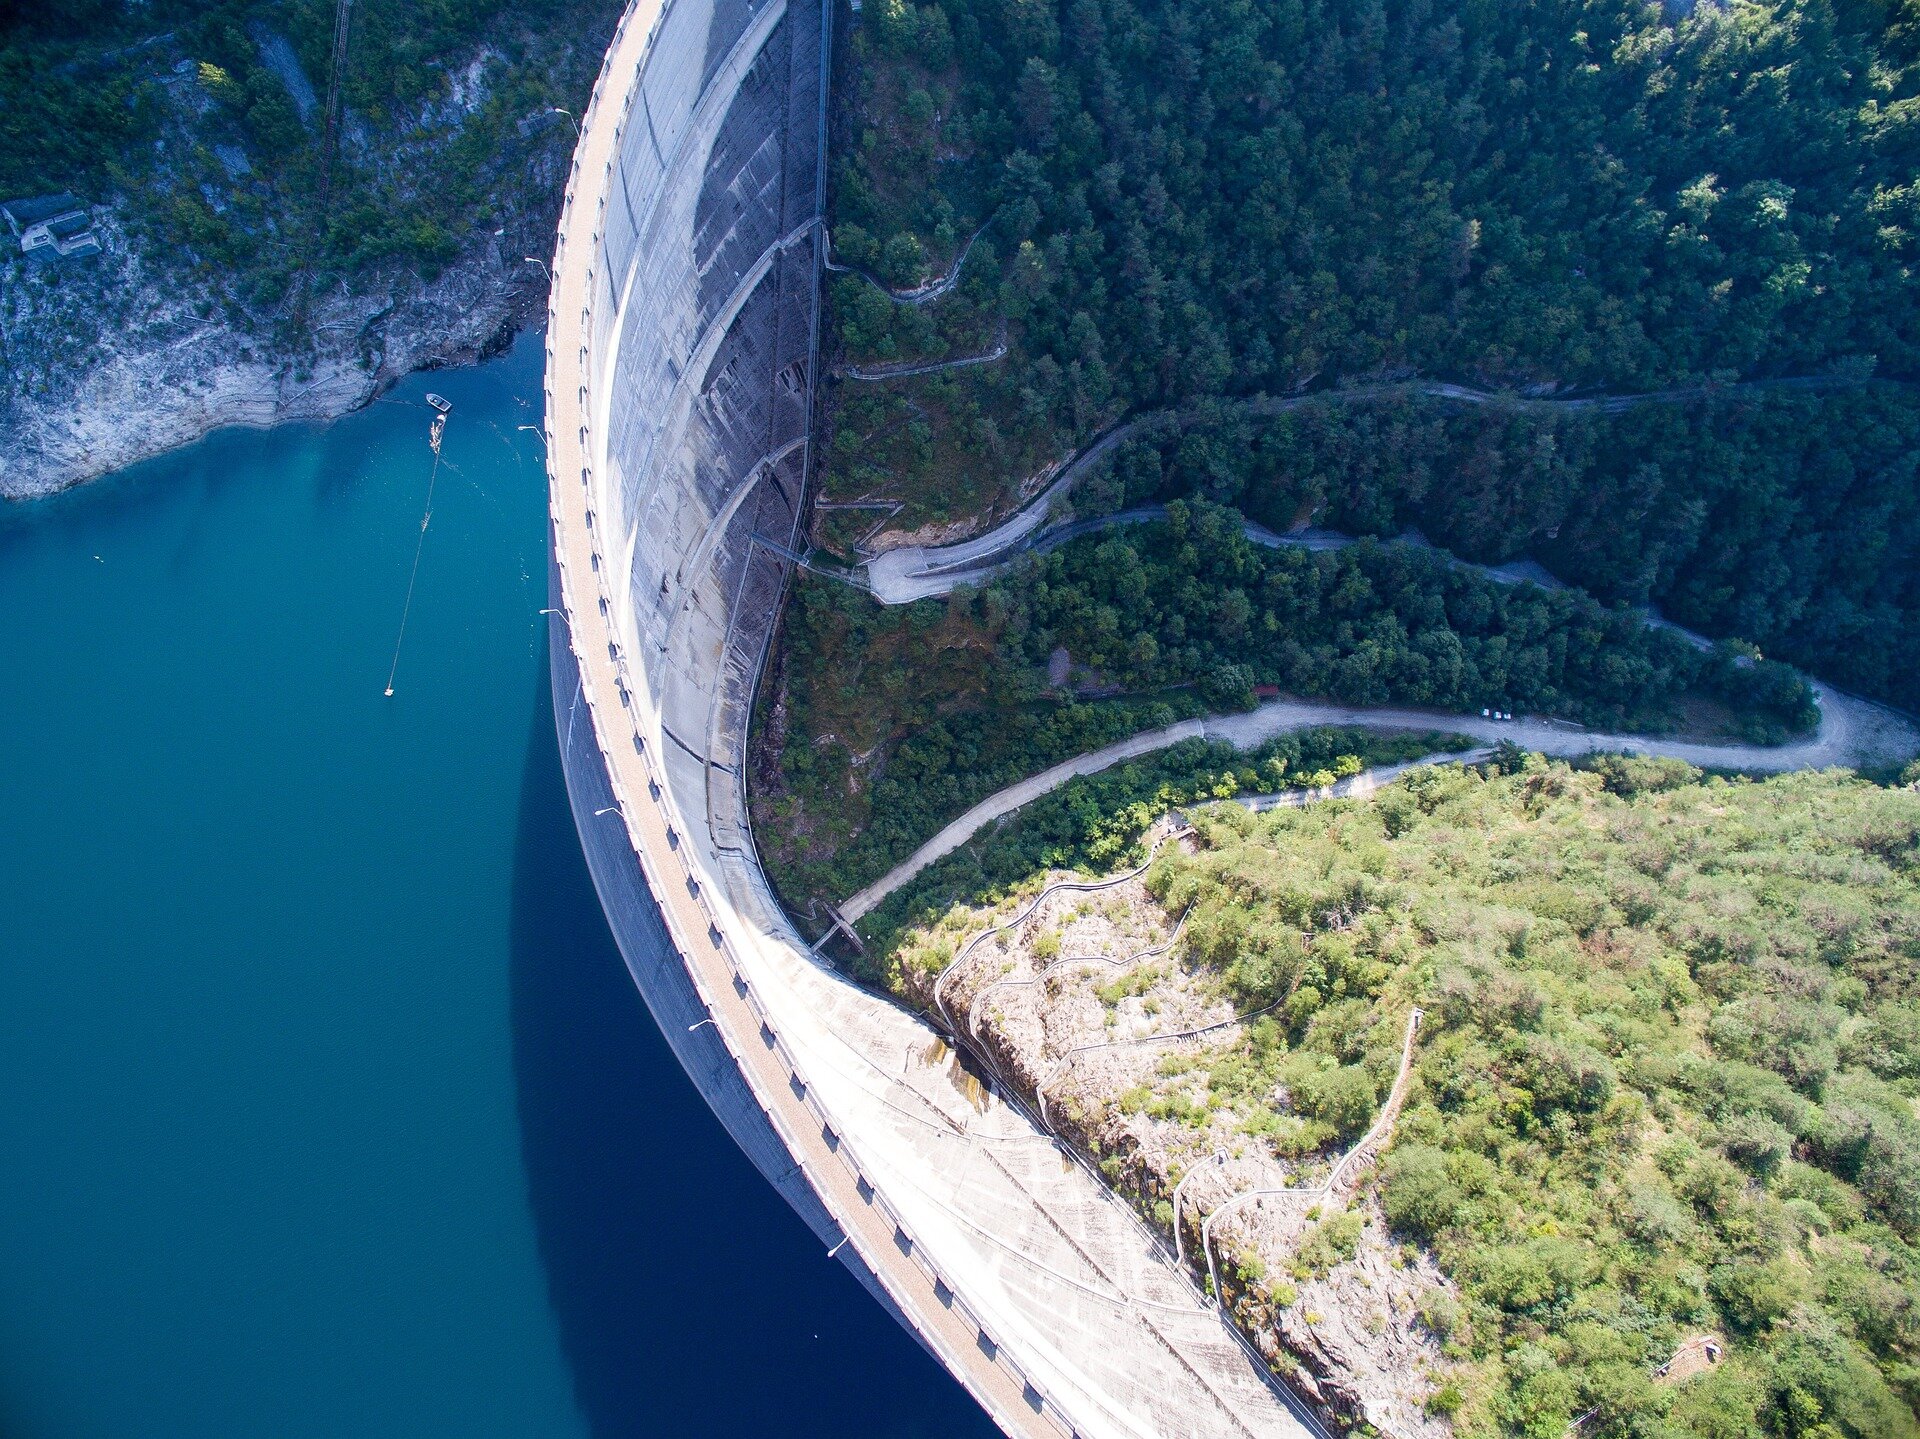 Study of US hydroelectric dams shows benefits to local economies decline with improvements in transmission capabilities